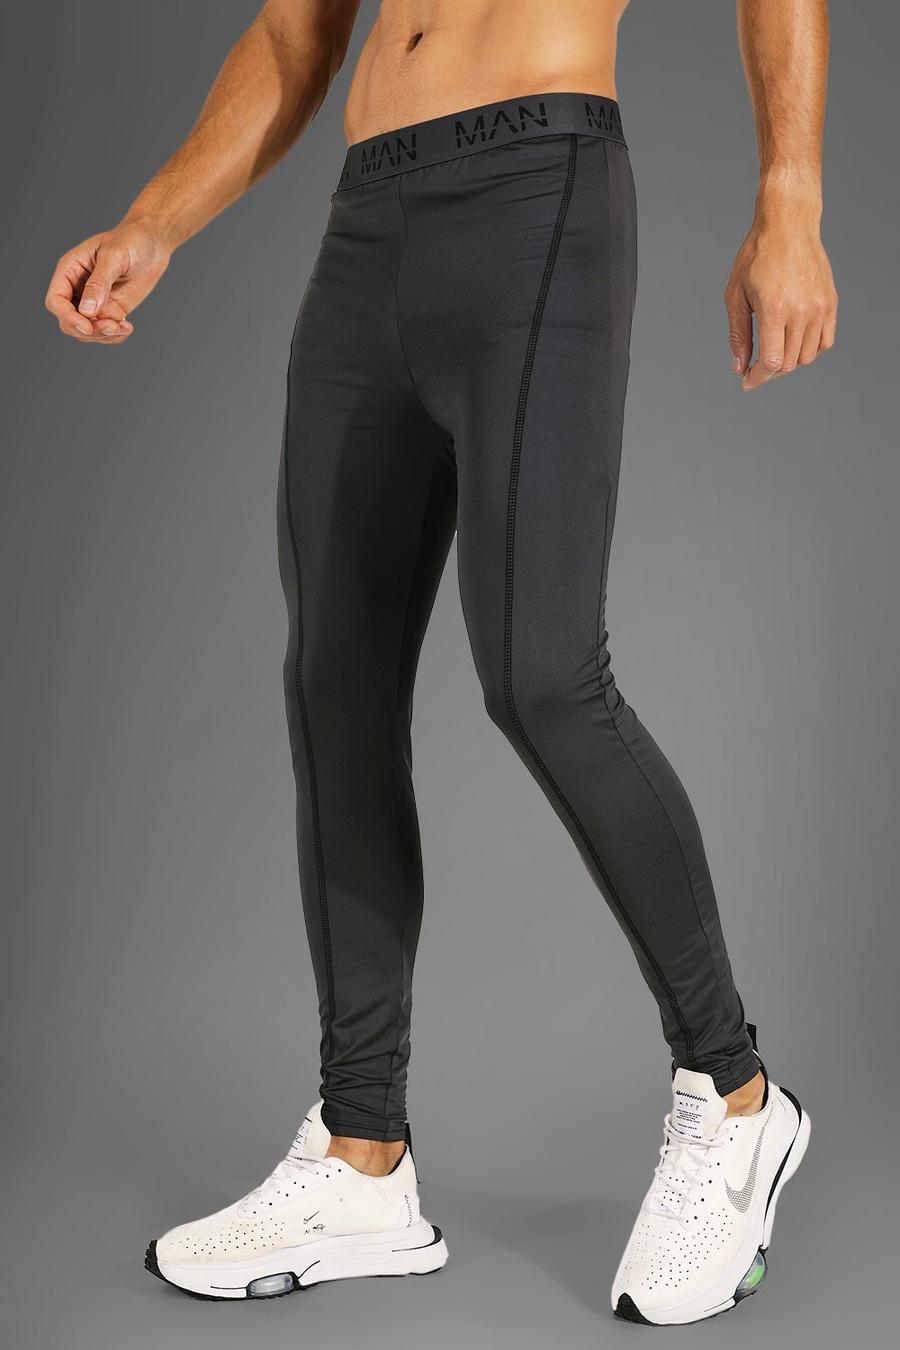 Legging Tall Man Active Gym a compressione, Charcoal grigio image number 1